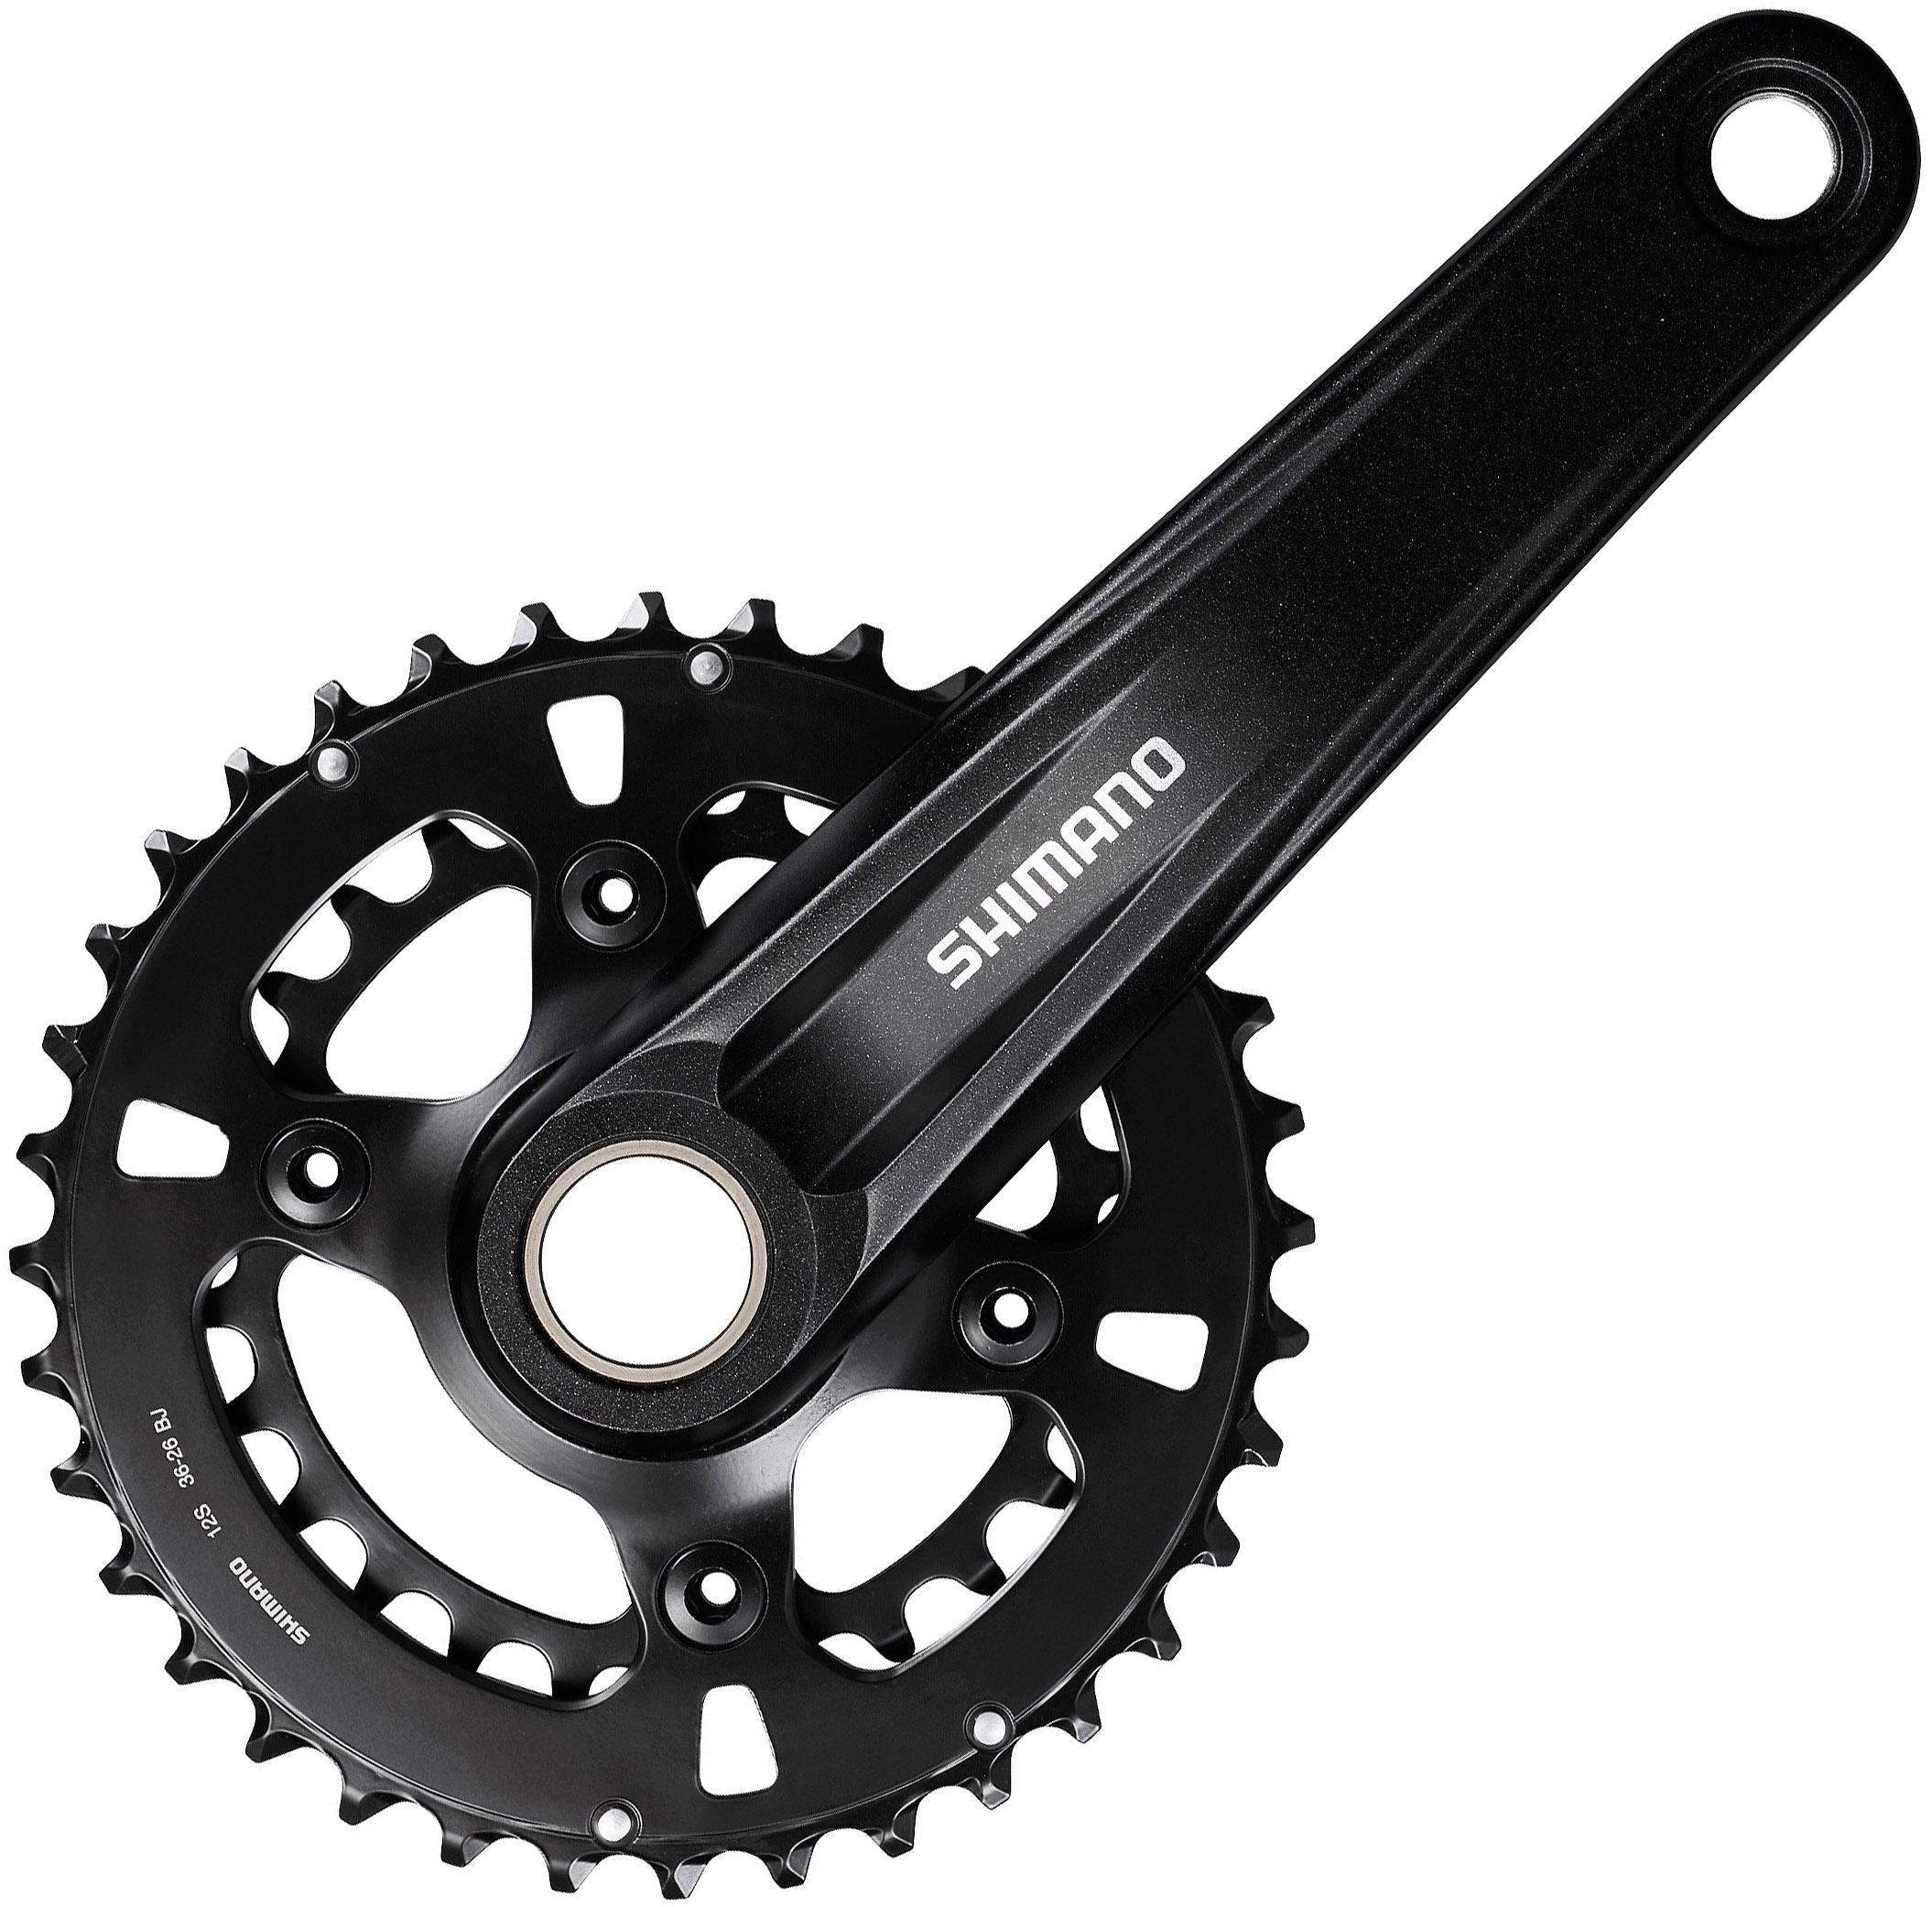 Shimano Mt610 12 Speed Double Chainset - Black